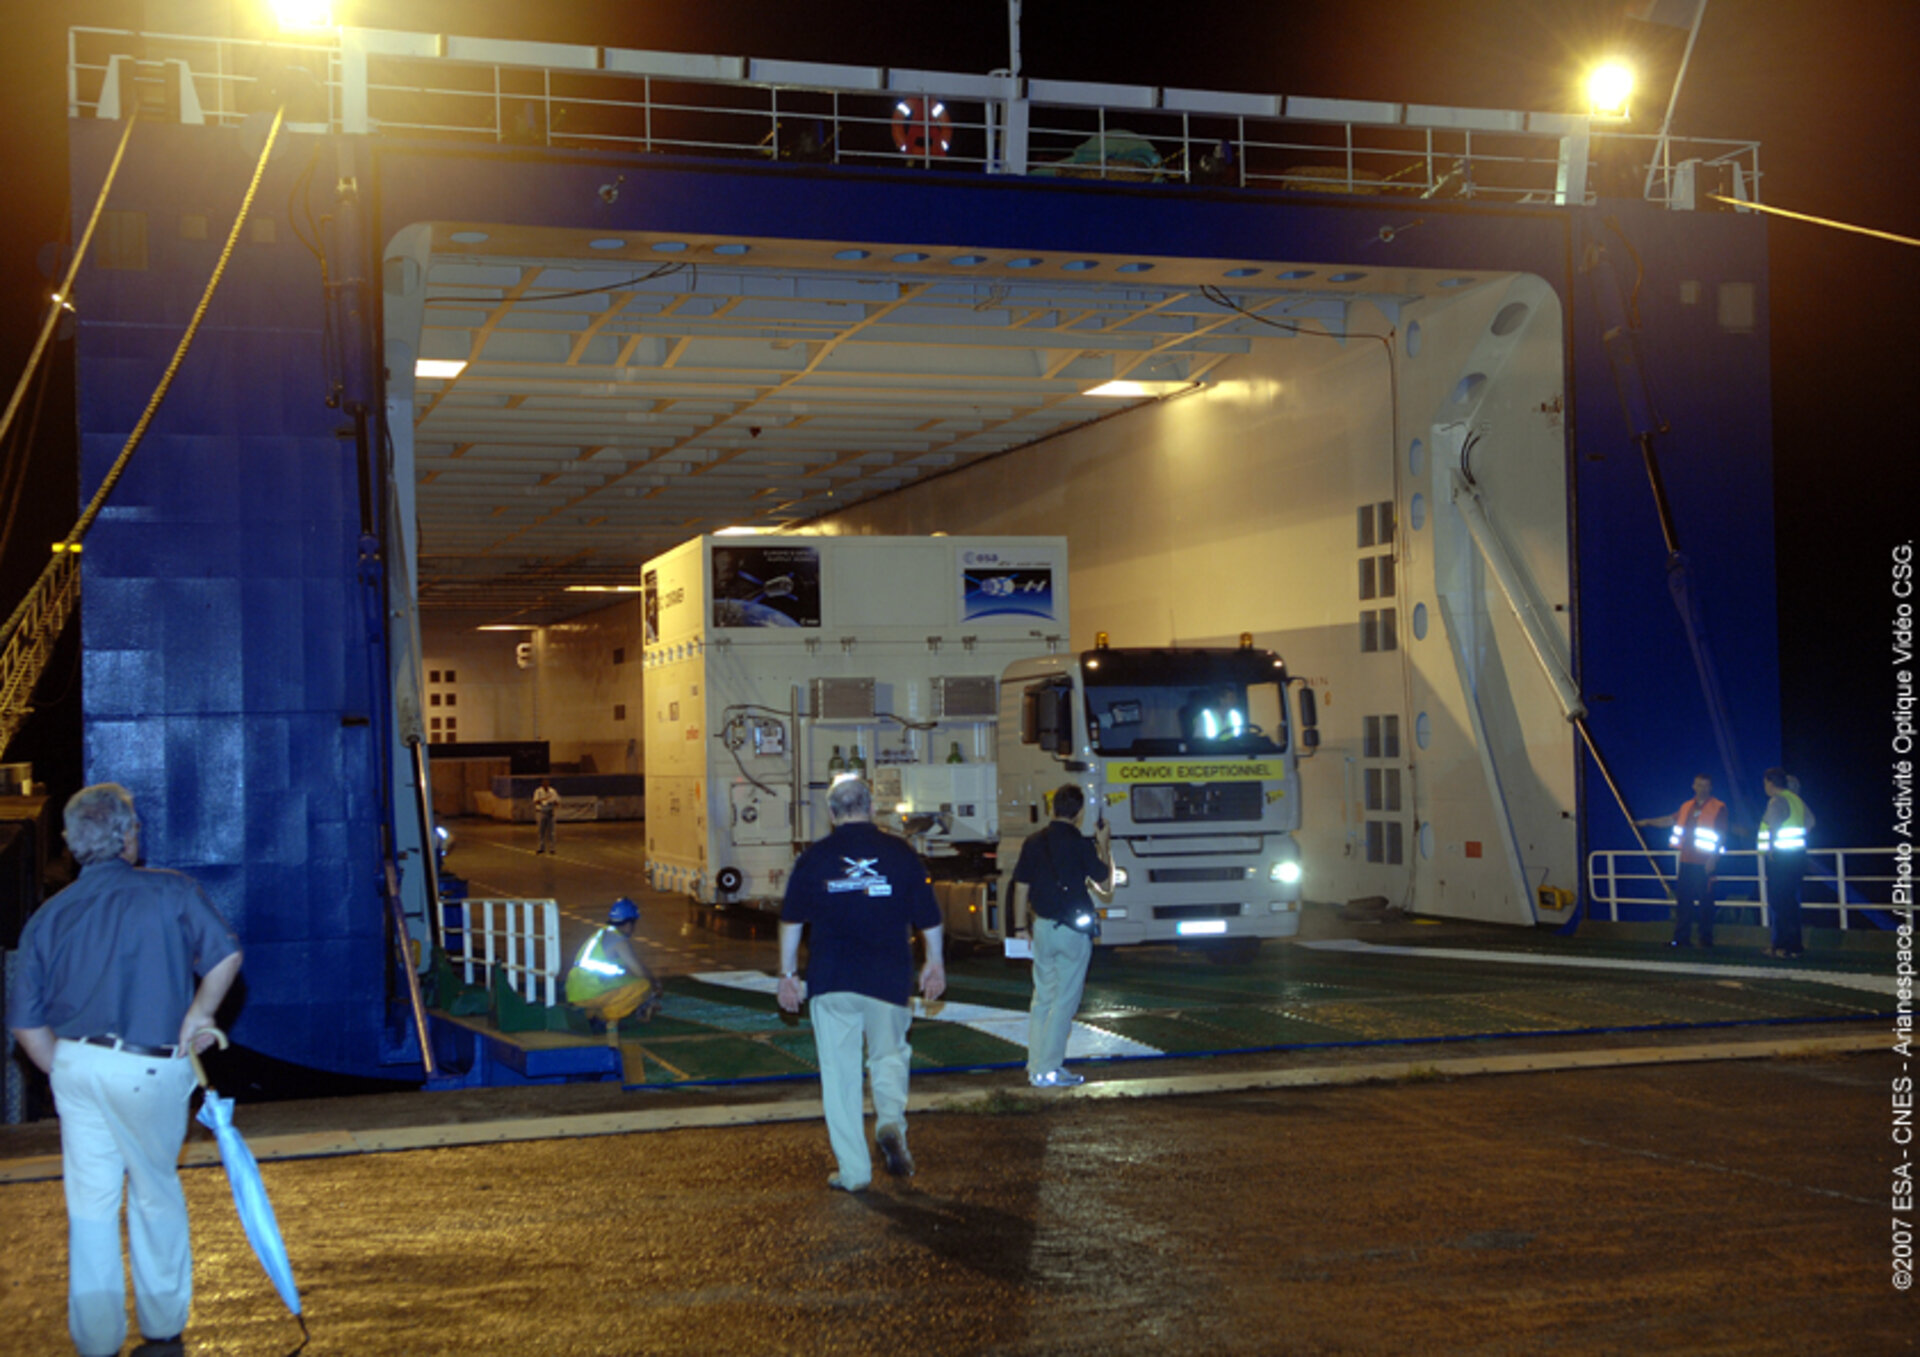 ATV containers are unloaded after arriving in Kourou on board French cargo ship MN Toucan